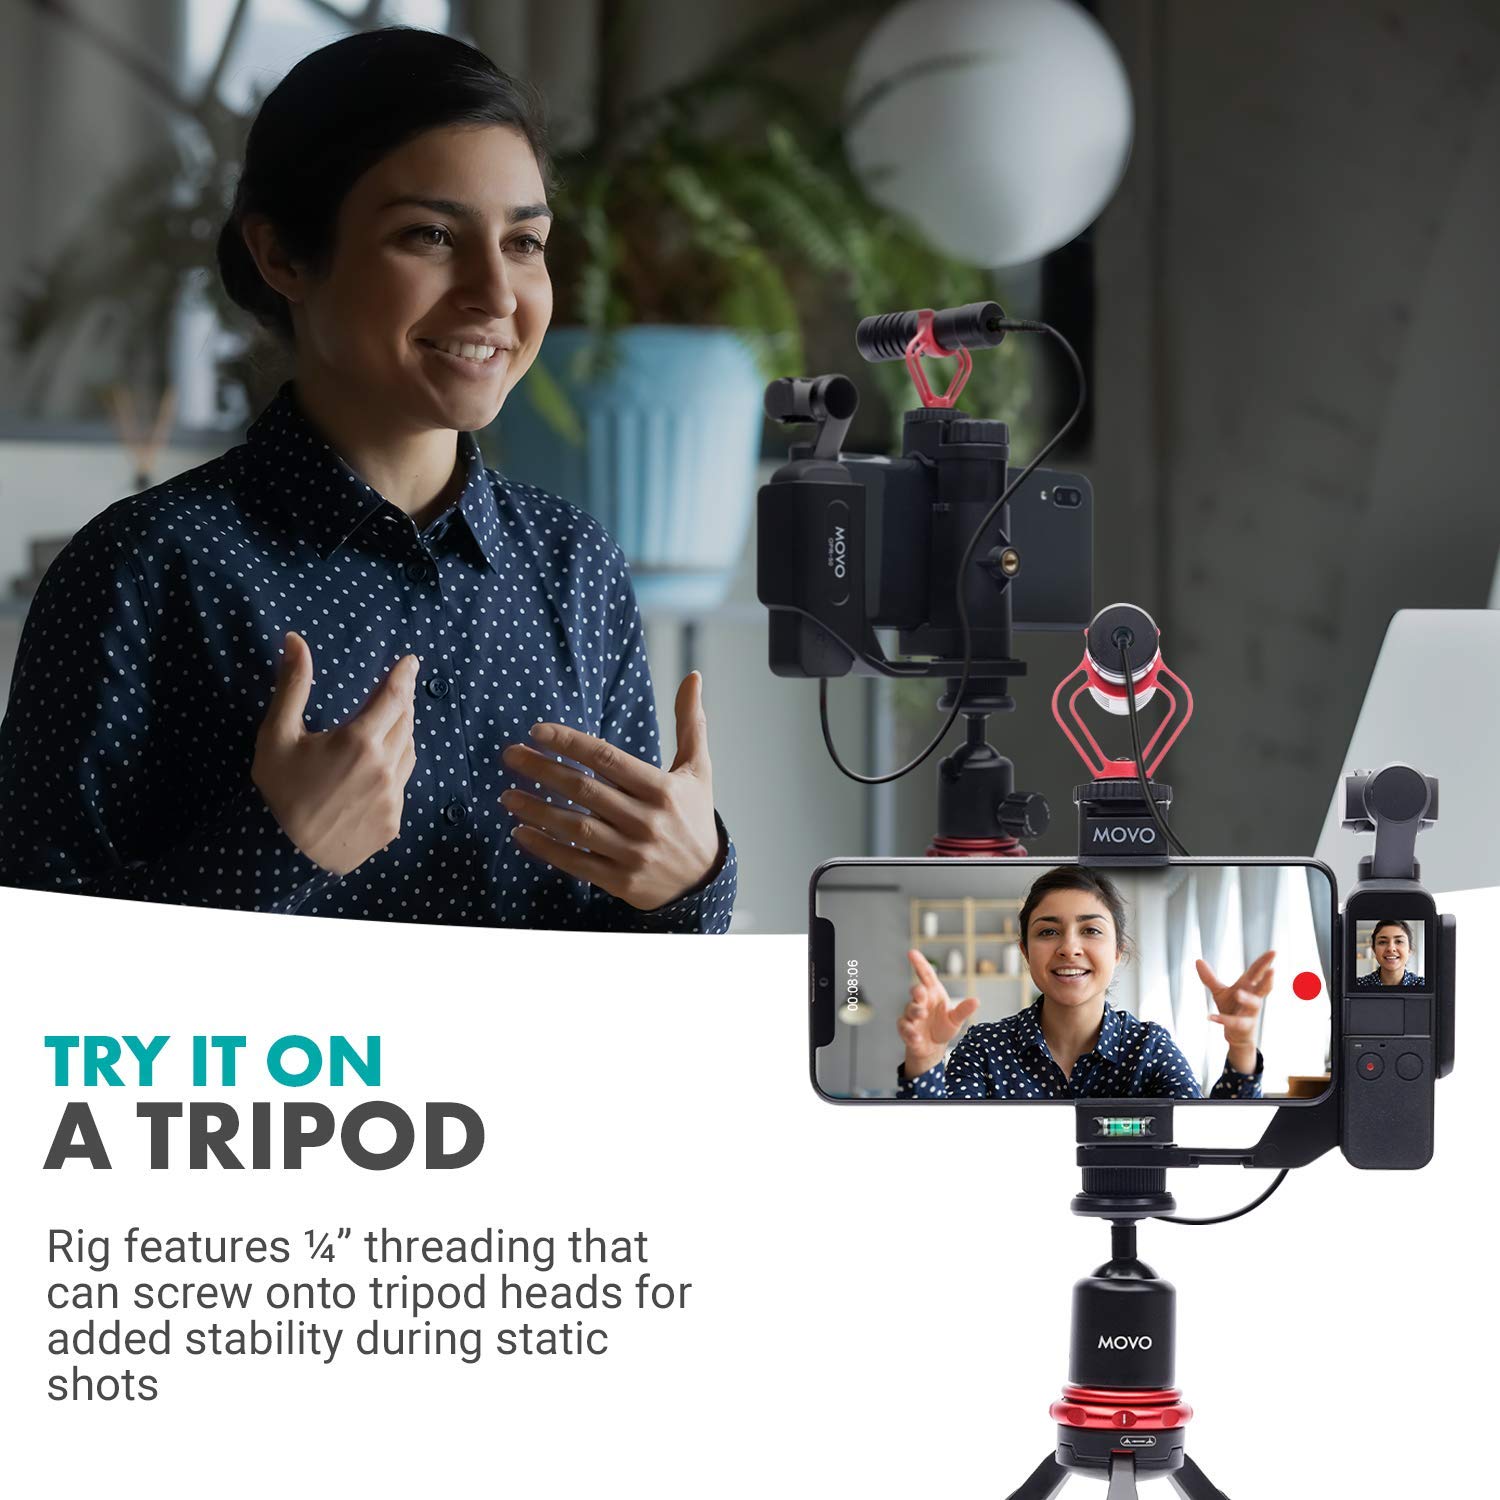 Movo Video Rig Compatible with The DJI OSMO Pocket 1, 2 - Includes Universal Smartphone Mount, Grip Handle, and 2 Cold Shoes for Mounting Microphone, Light - OSMO Pocket Microphone and Video Rig  - Like New